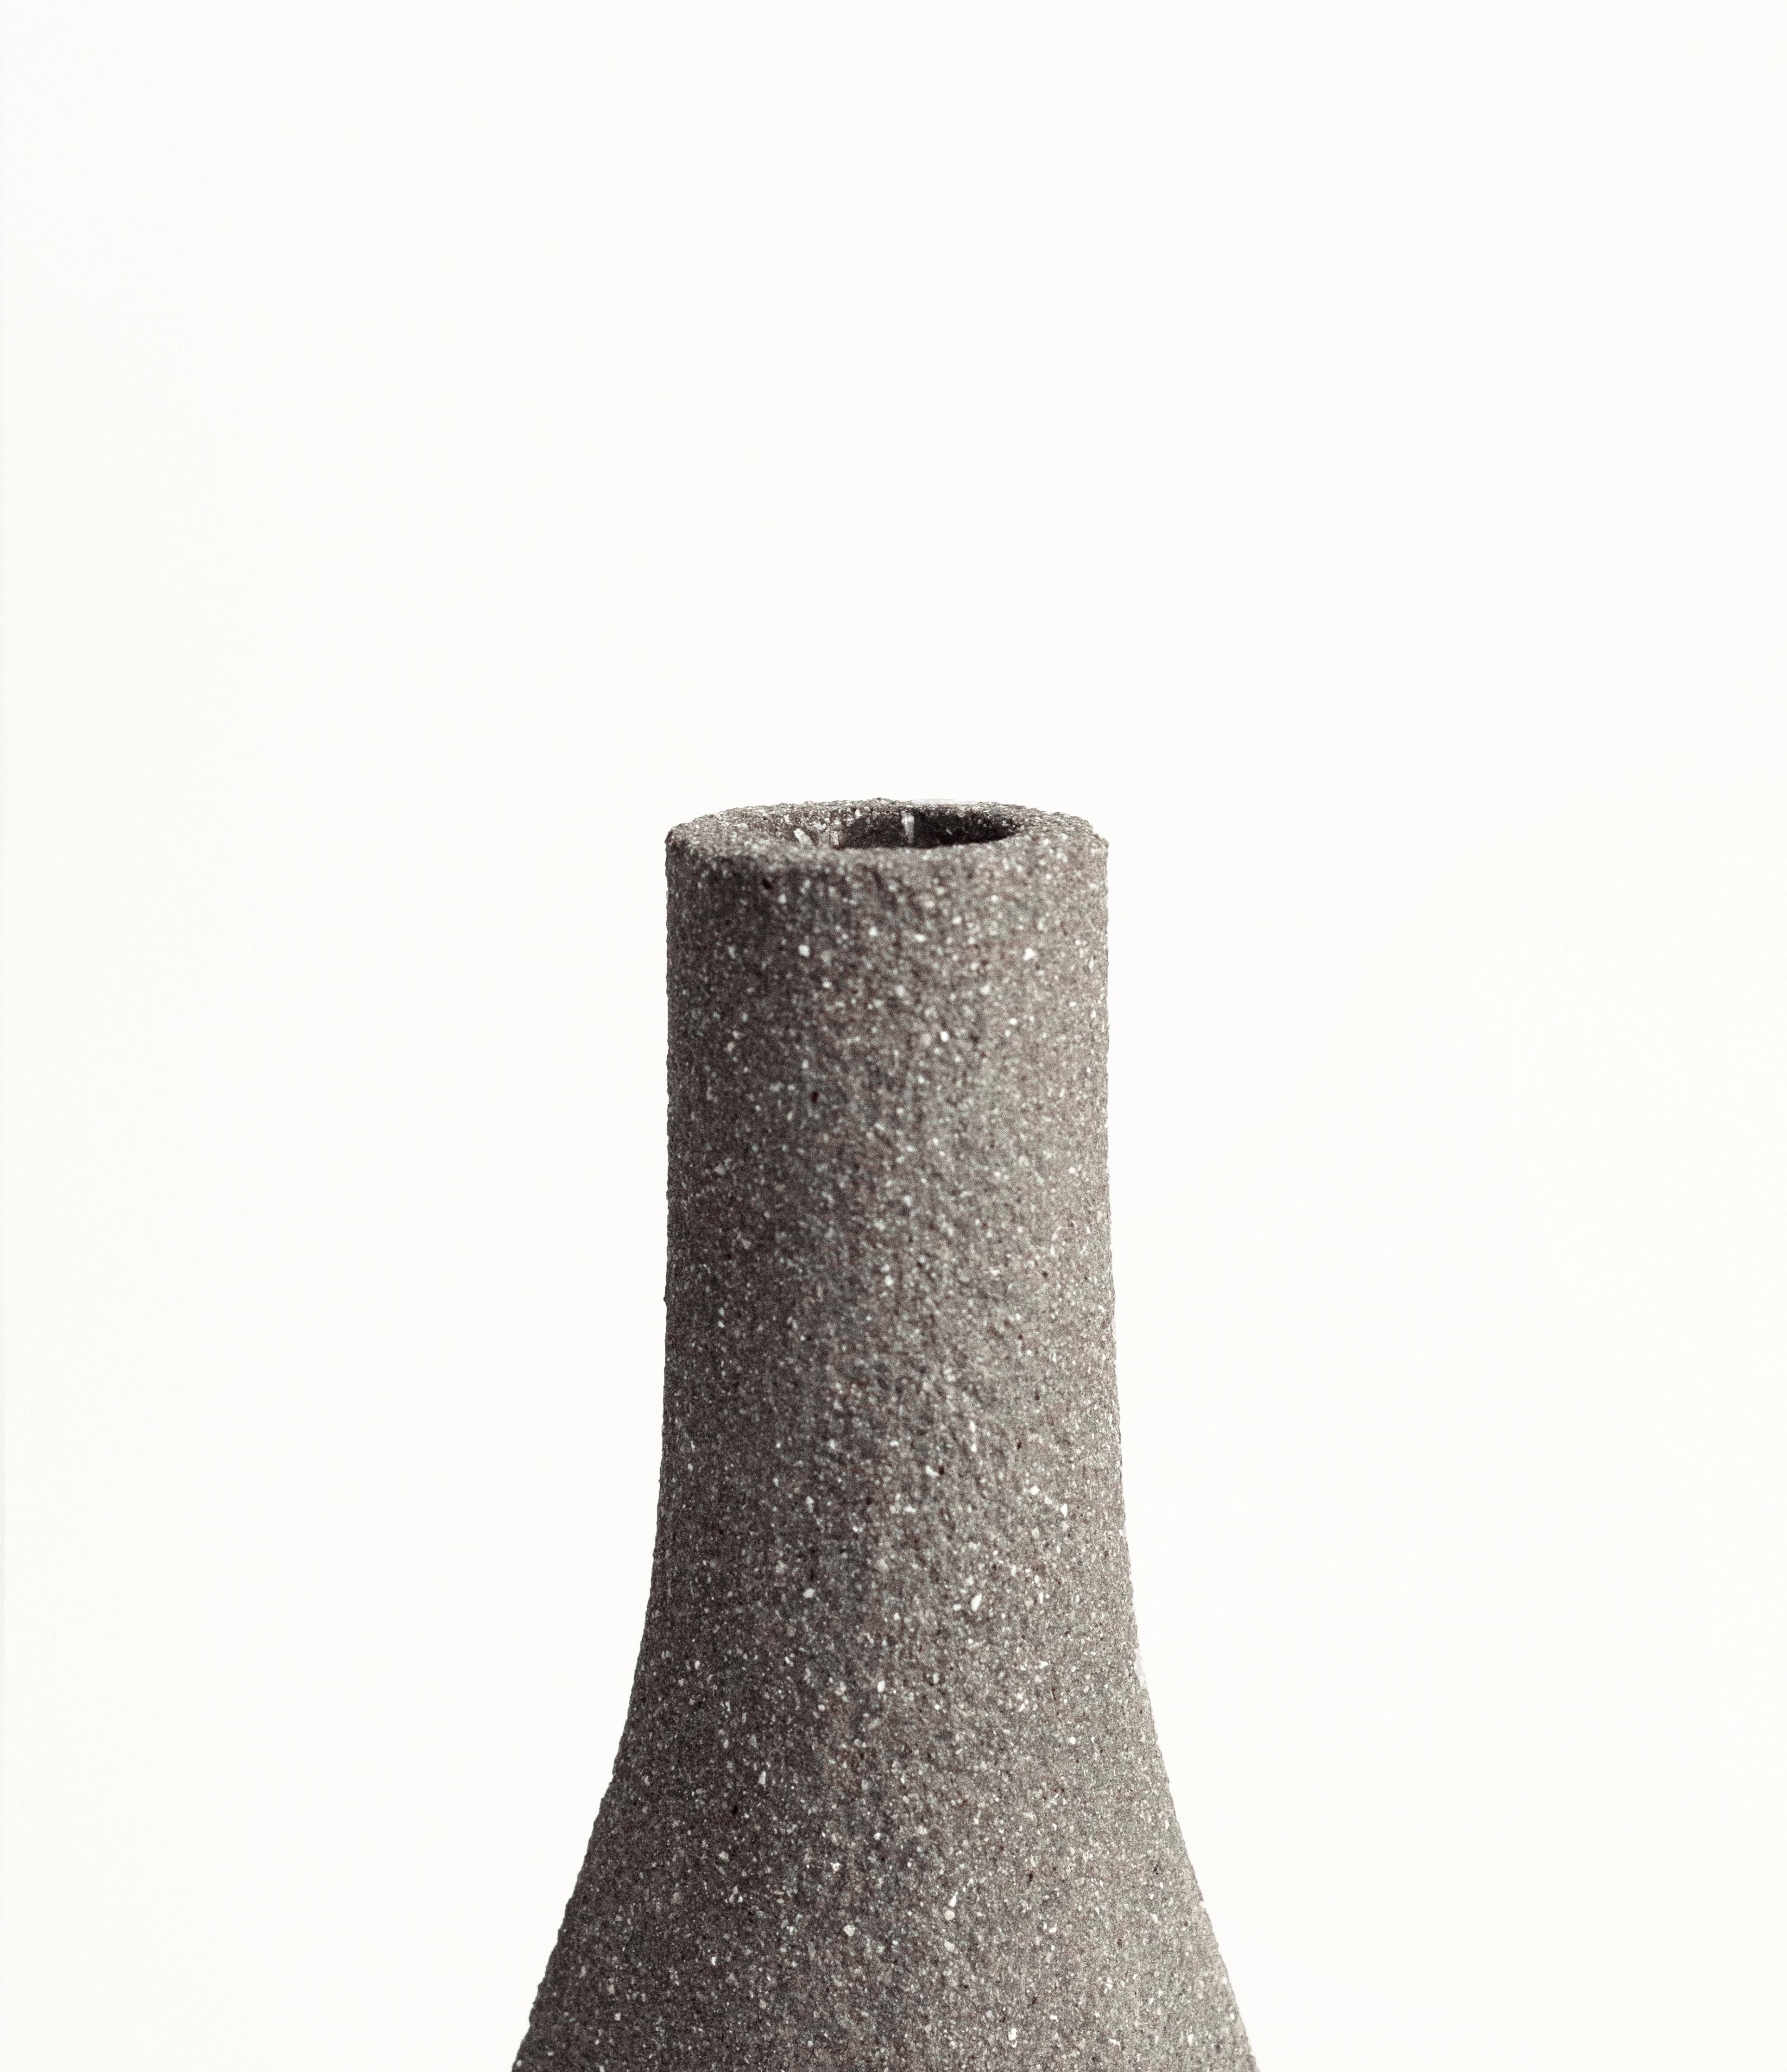 Minimalist 21st Century Bouteille 'M' Vase in Grey Ceramic, Hand-Crafted in France